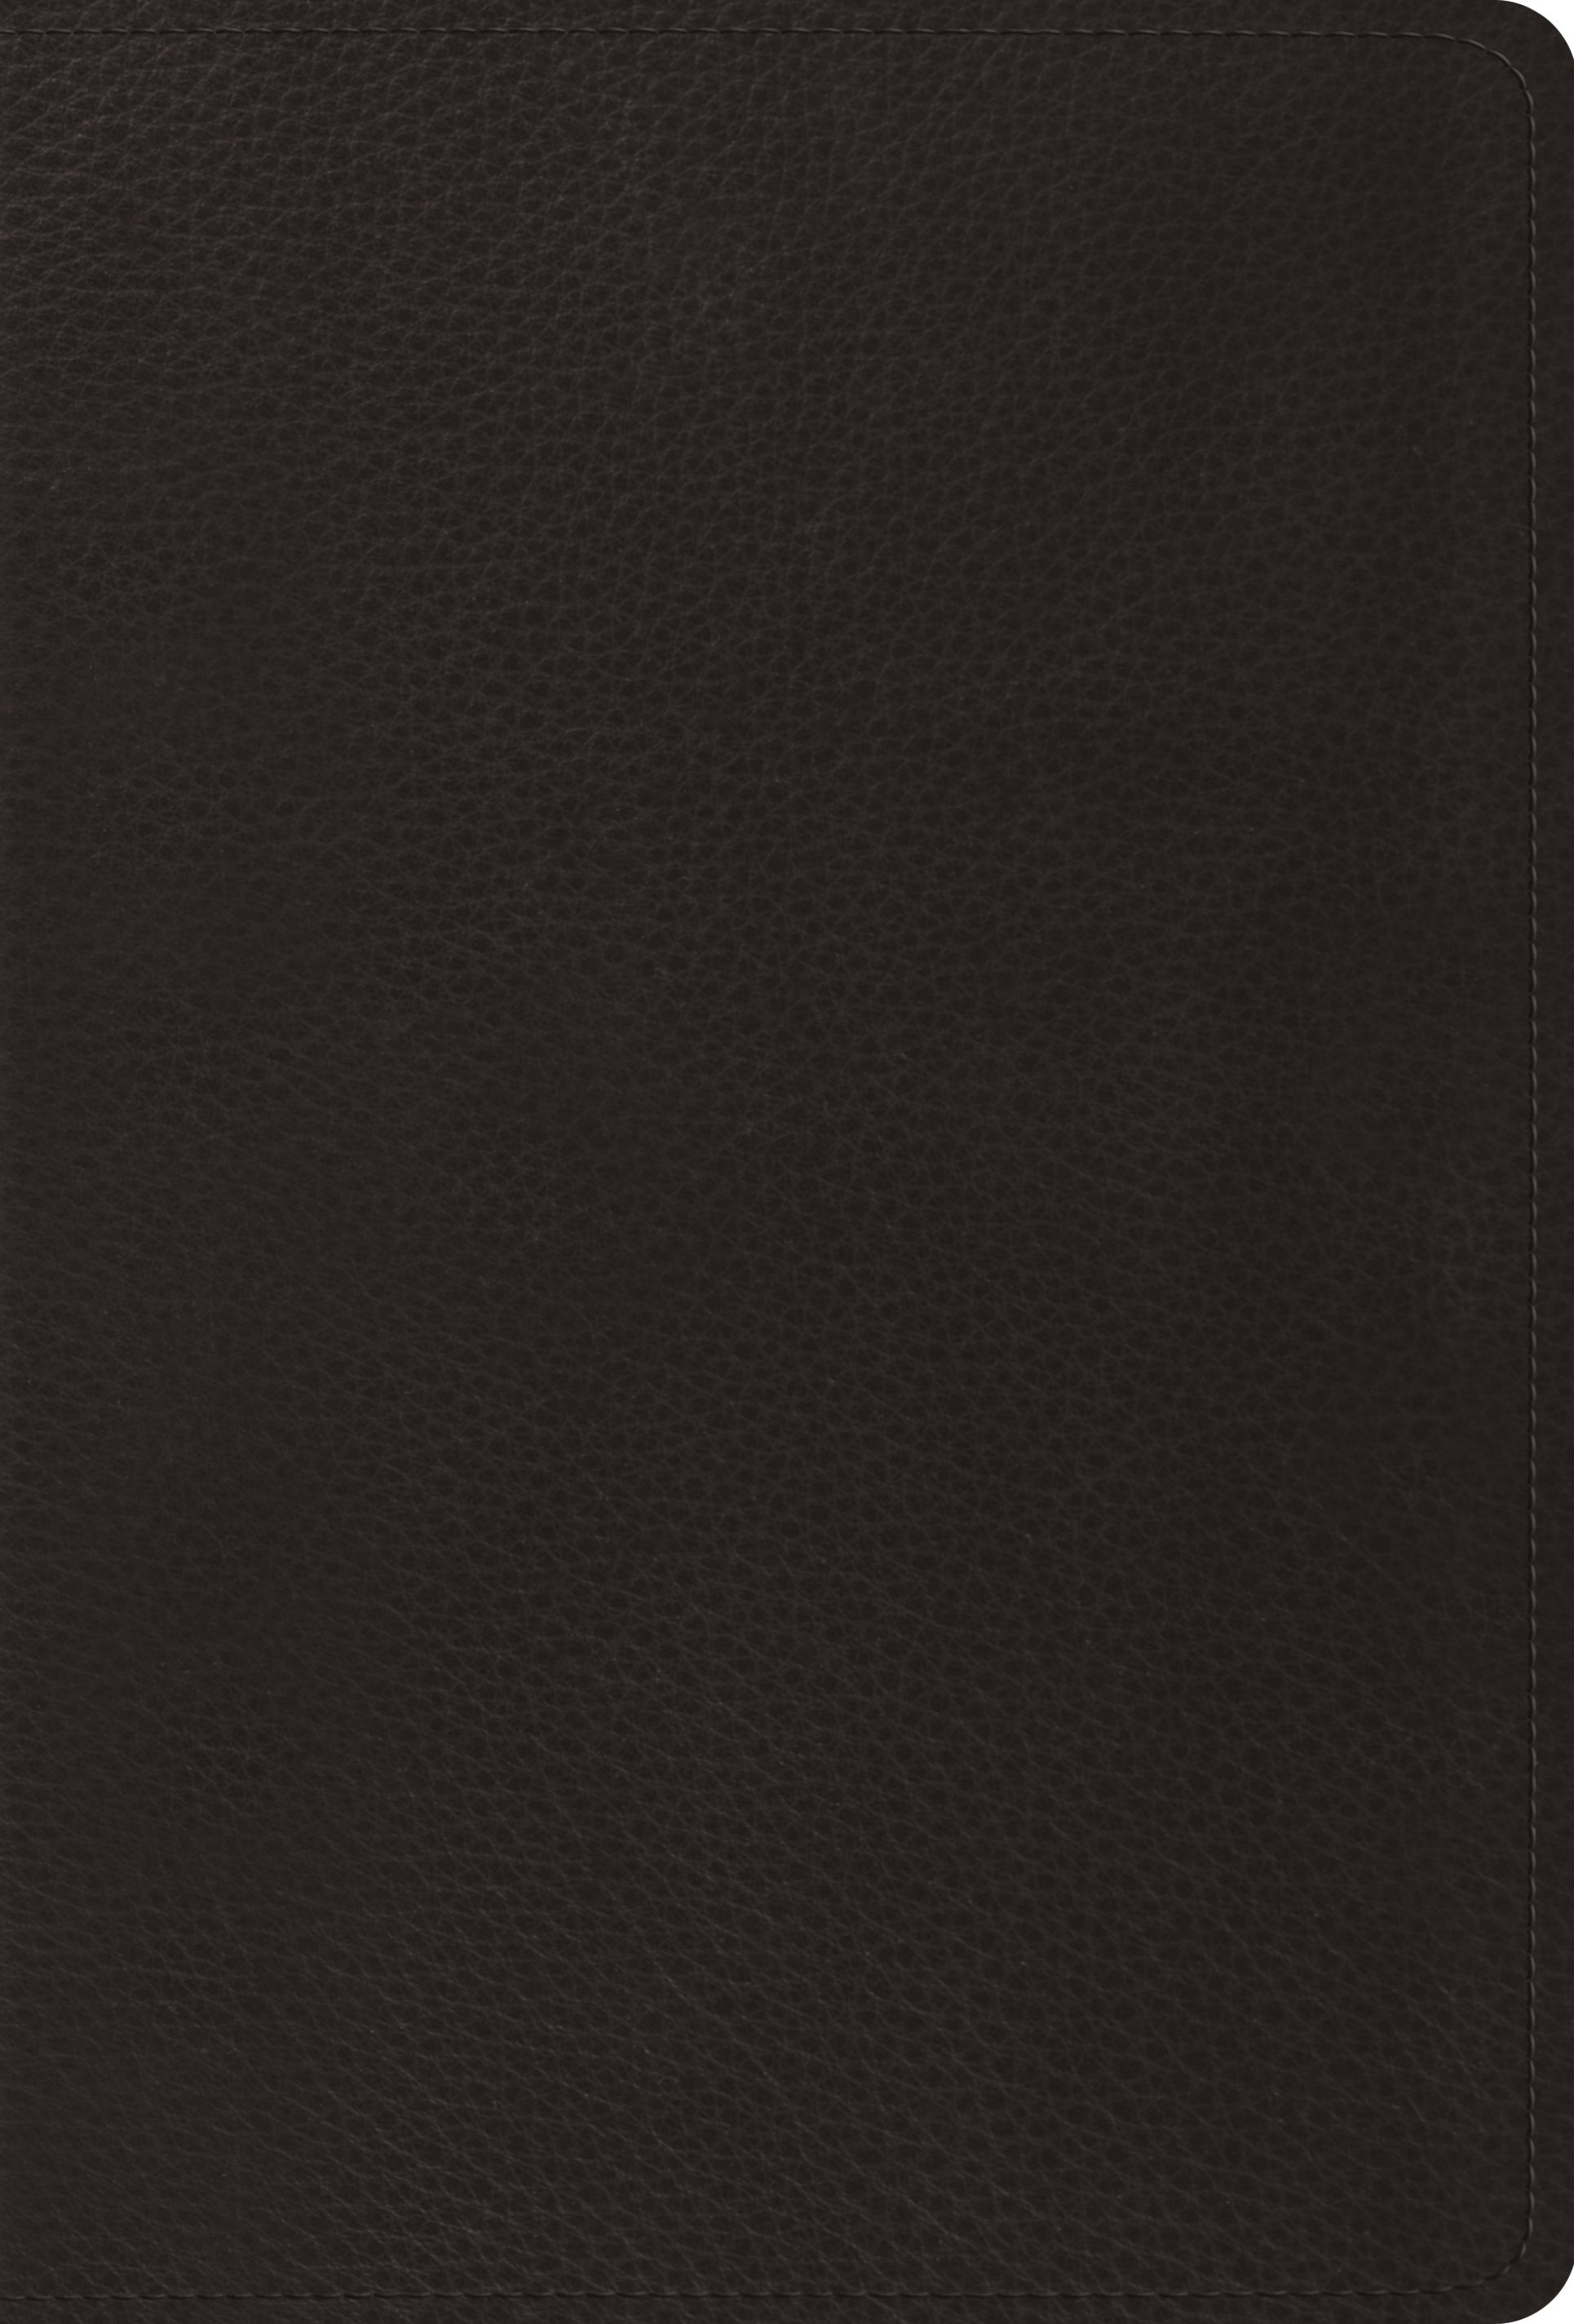 Image of The Psalms, ESV, Top Grain Leather, Black, Ribbon Marker, Large Print, Compact other